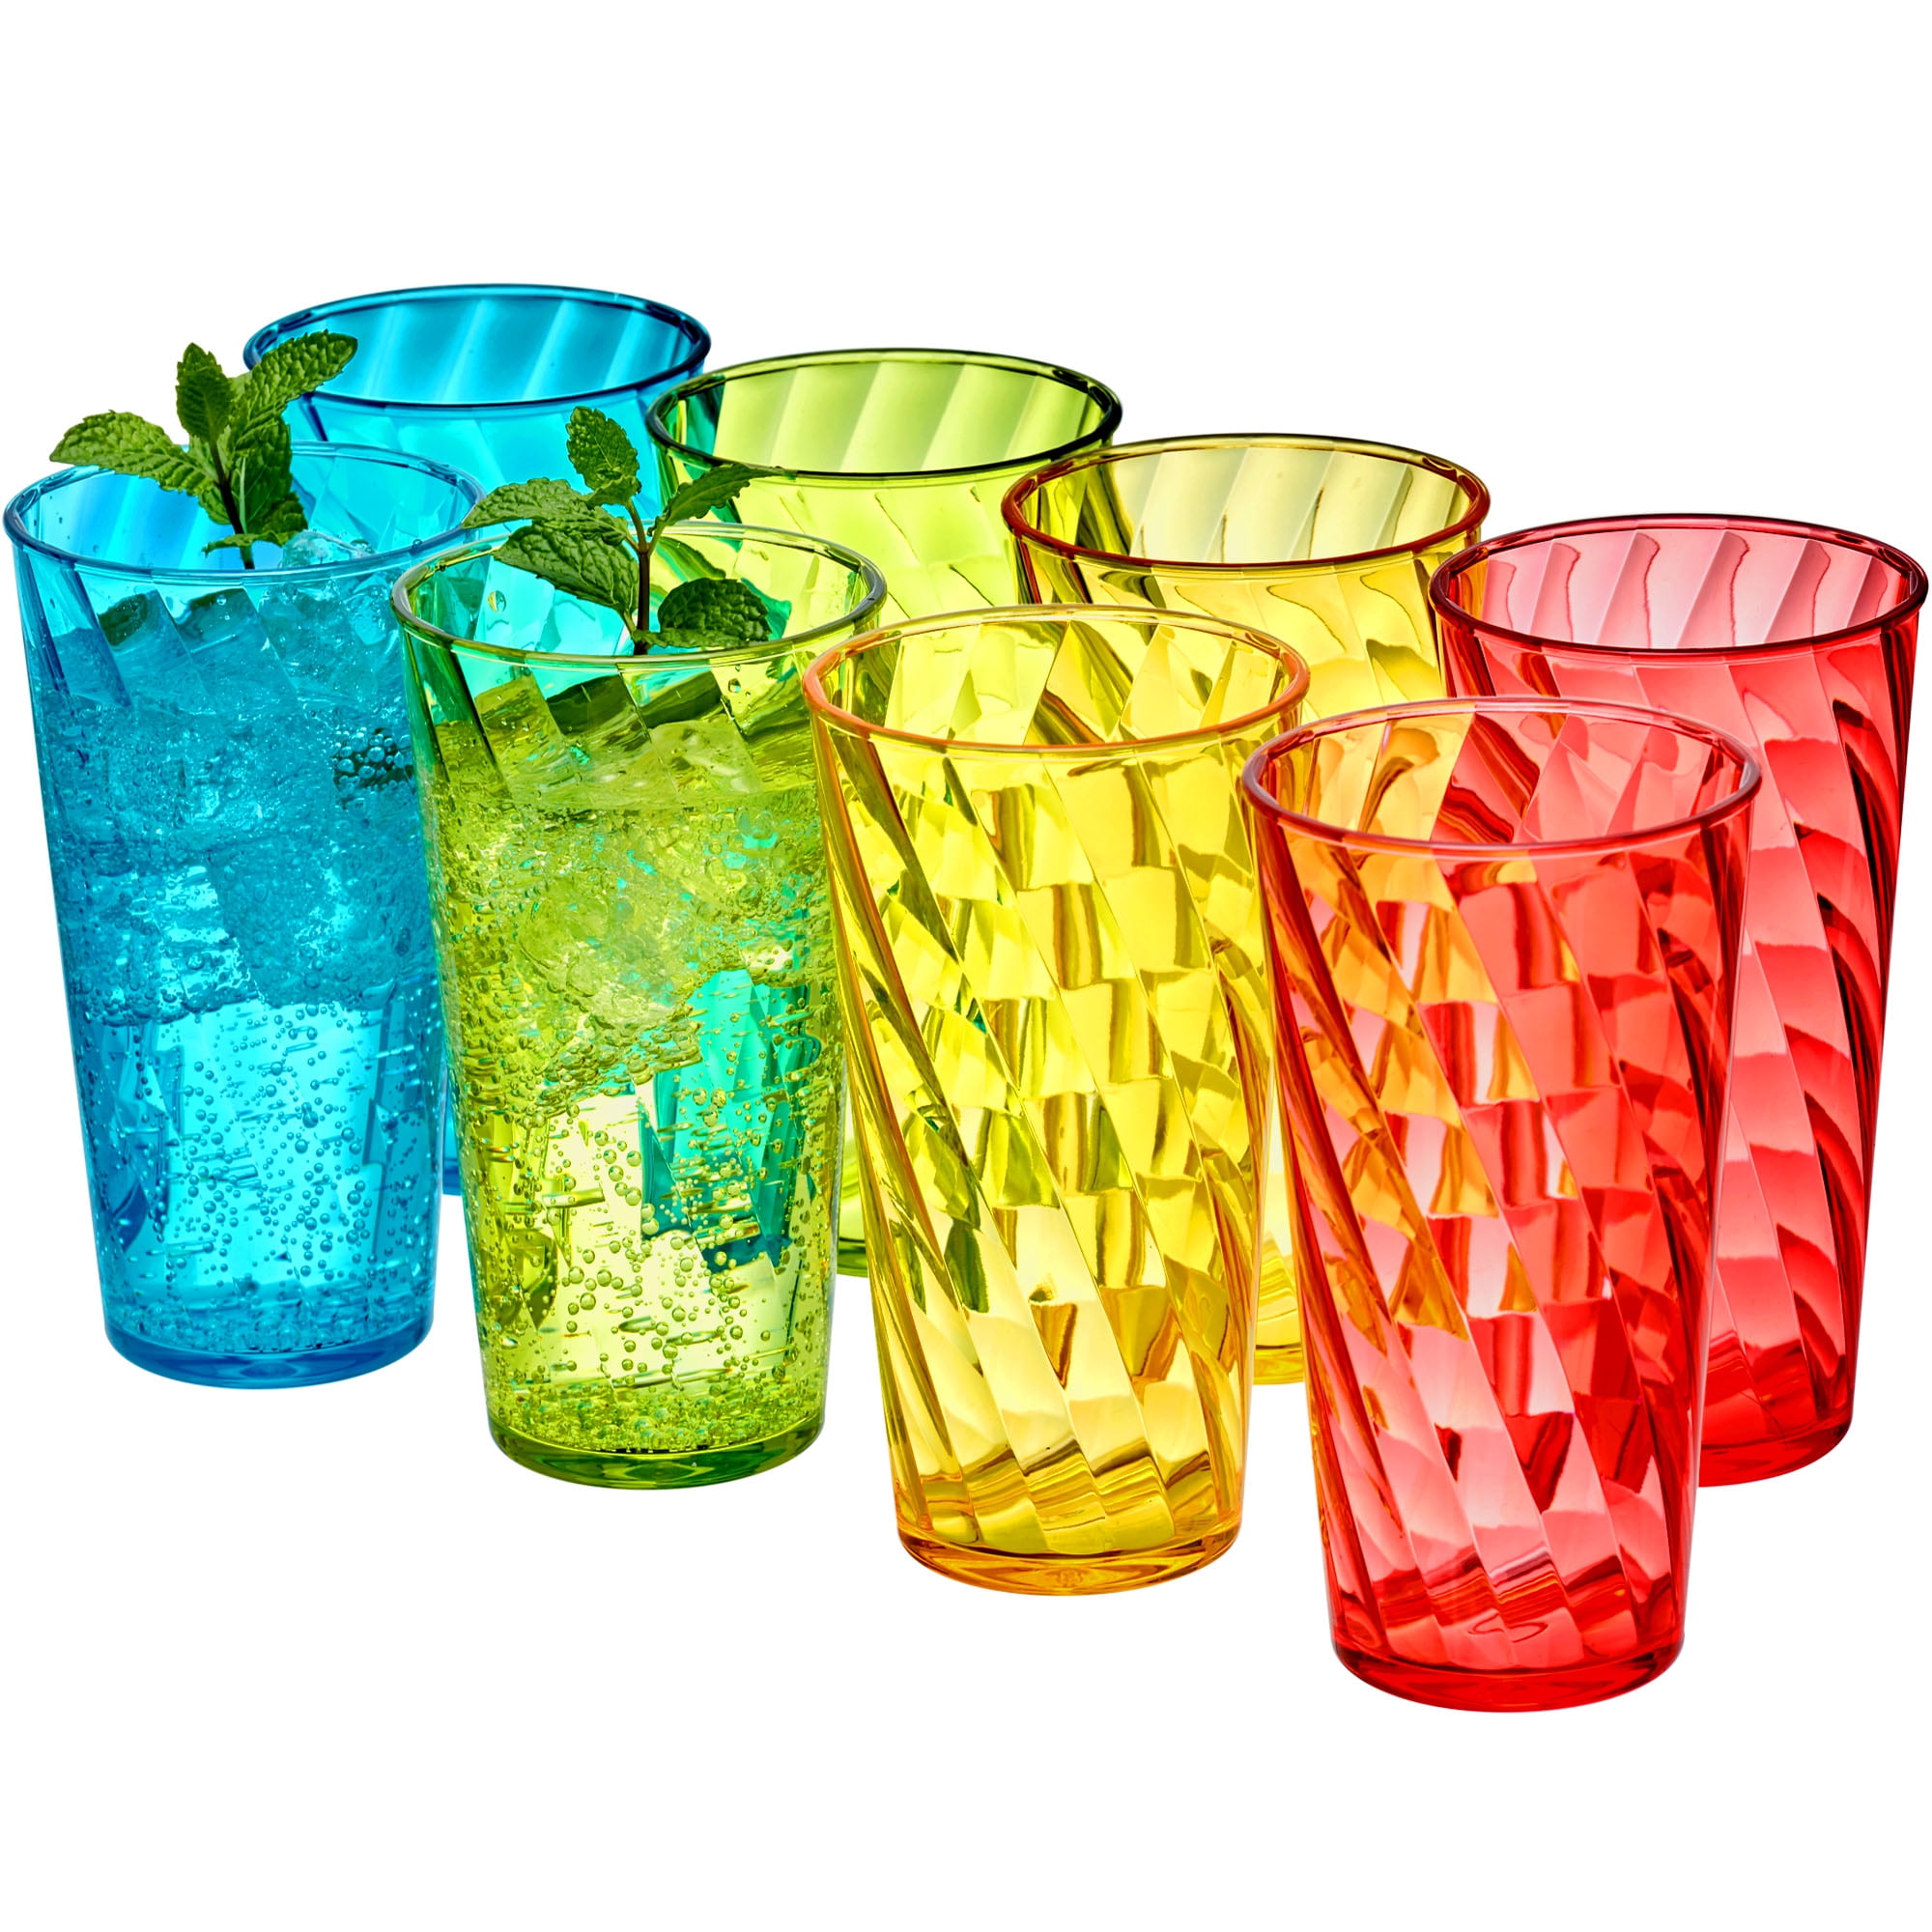 Dotbengc Acrylic Drinking Glasses, Colored Plastic Cups, Unbreakable  Tumblers Set of 8, Reusable Dri…See more Dotbengc Acrylic Drinking Glasses